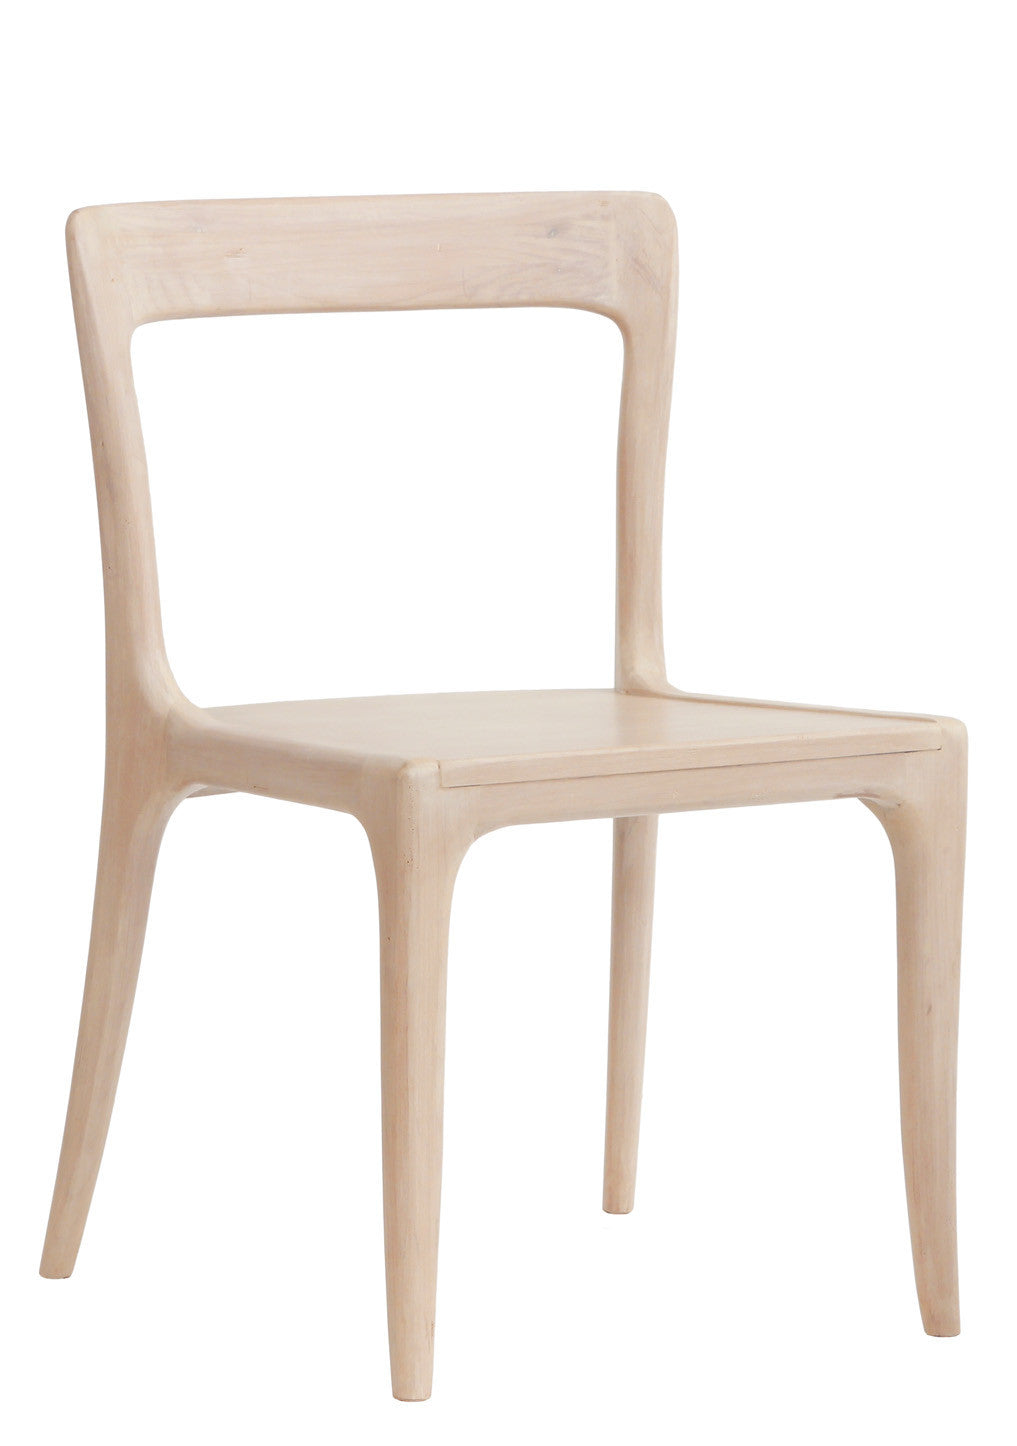 Furniture - James Armless Modern Dining Chair - Cashew ( 28 Finish Options )